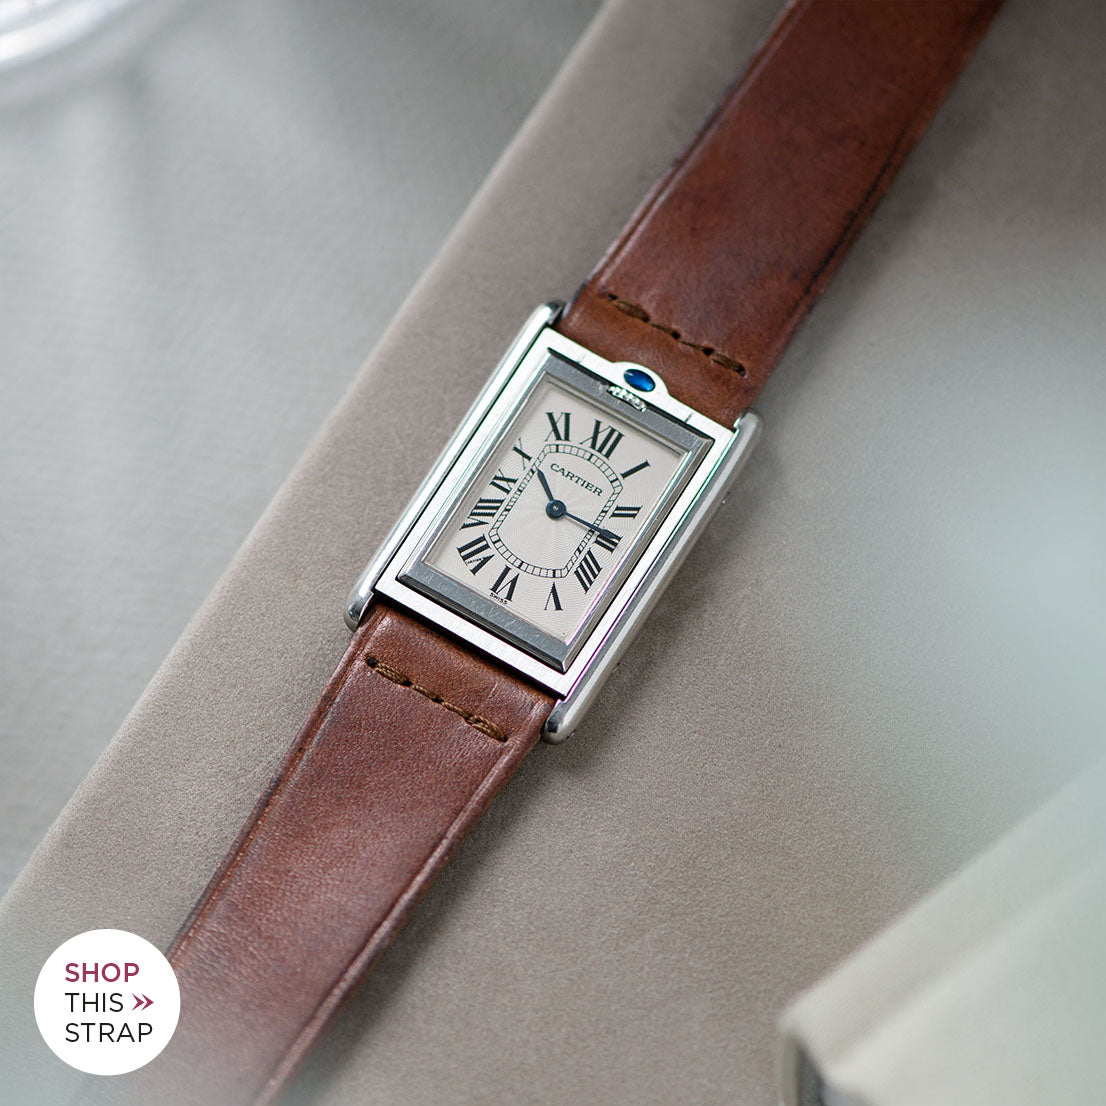 Siena Brown Extra Thin Leather Watch Strap